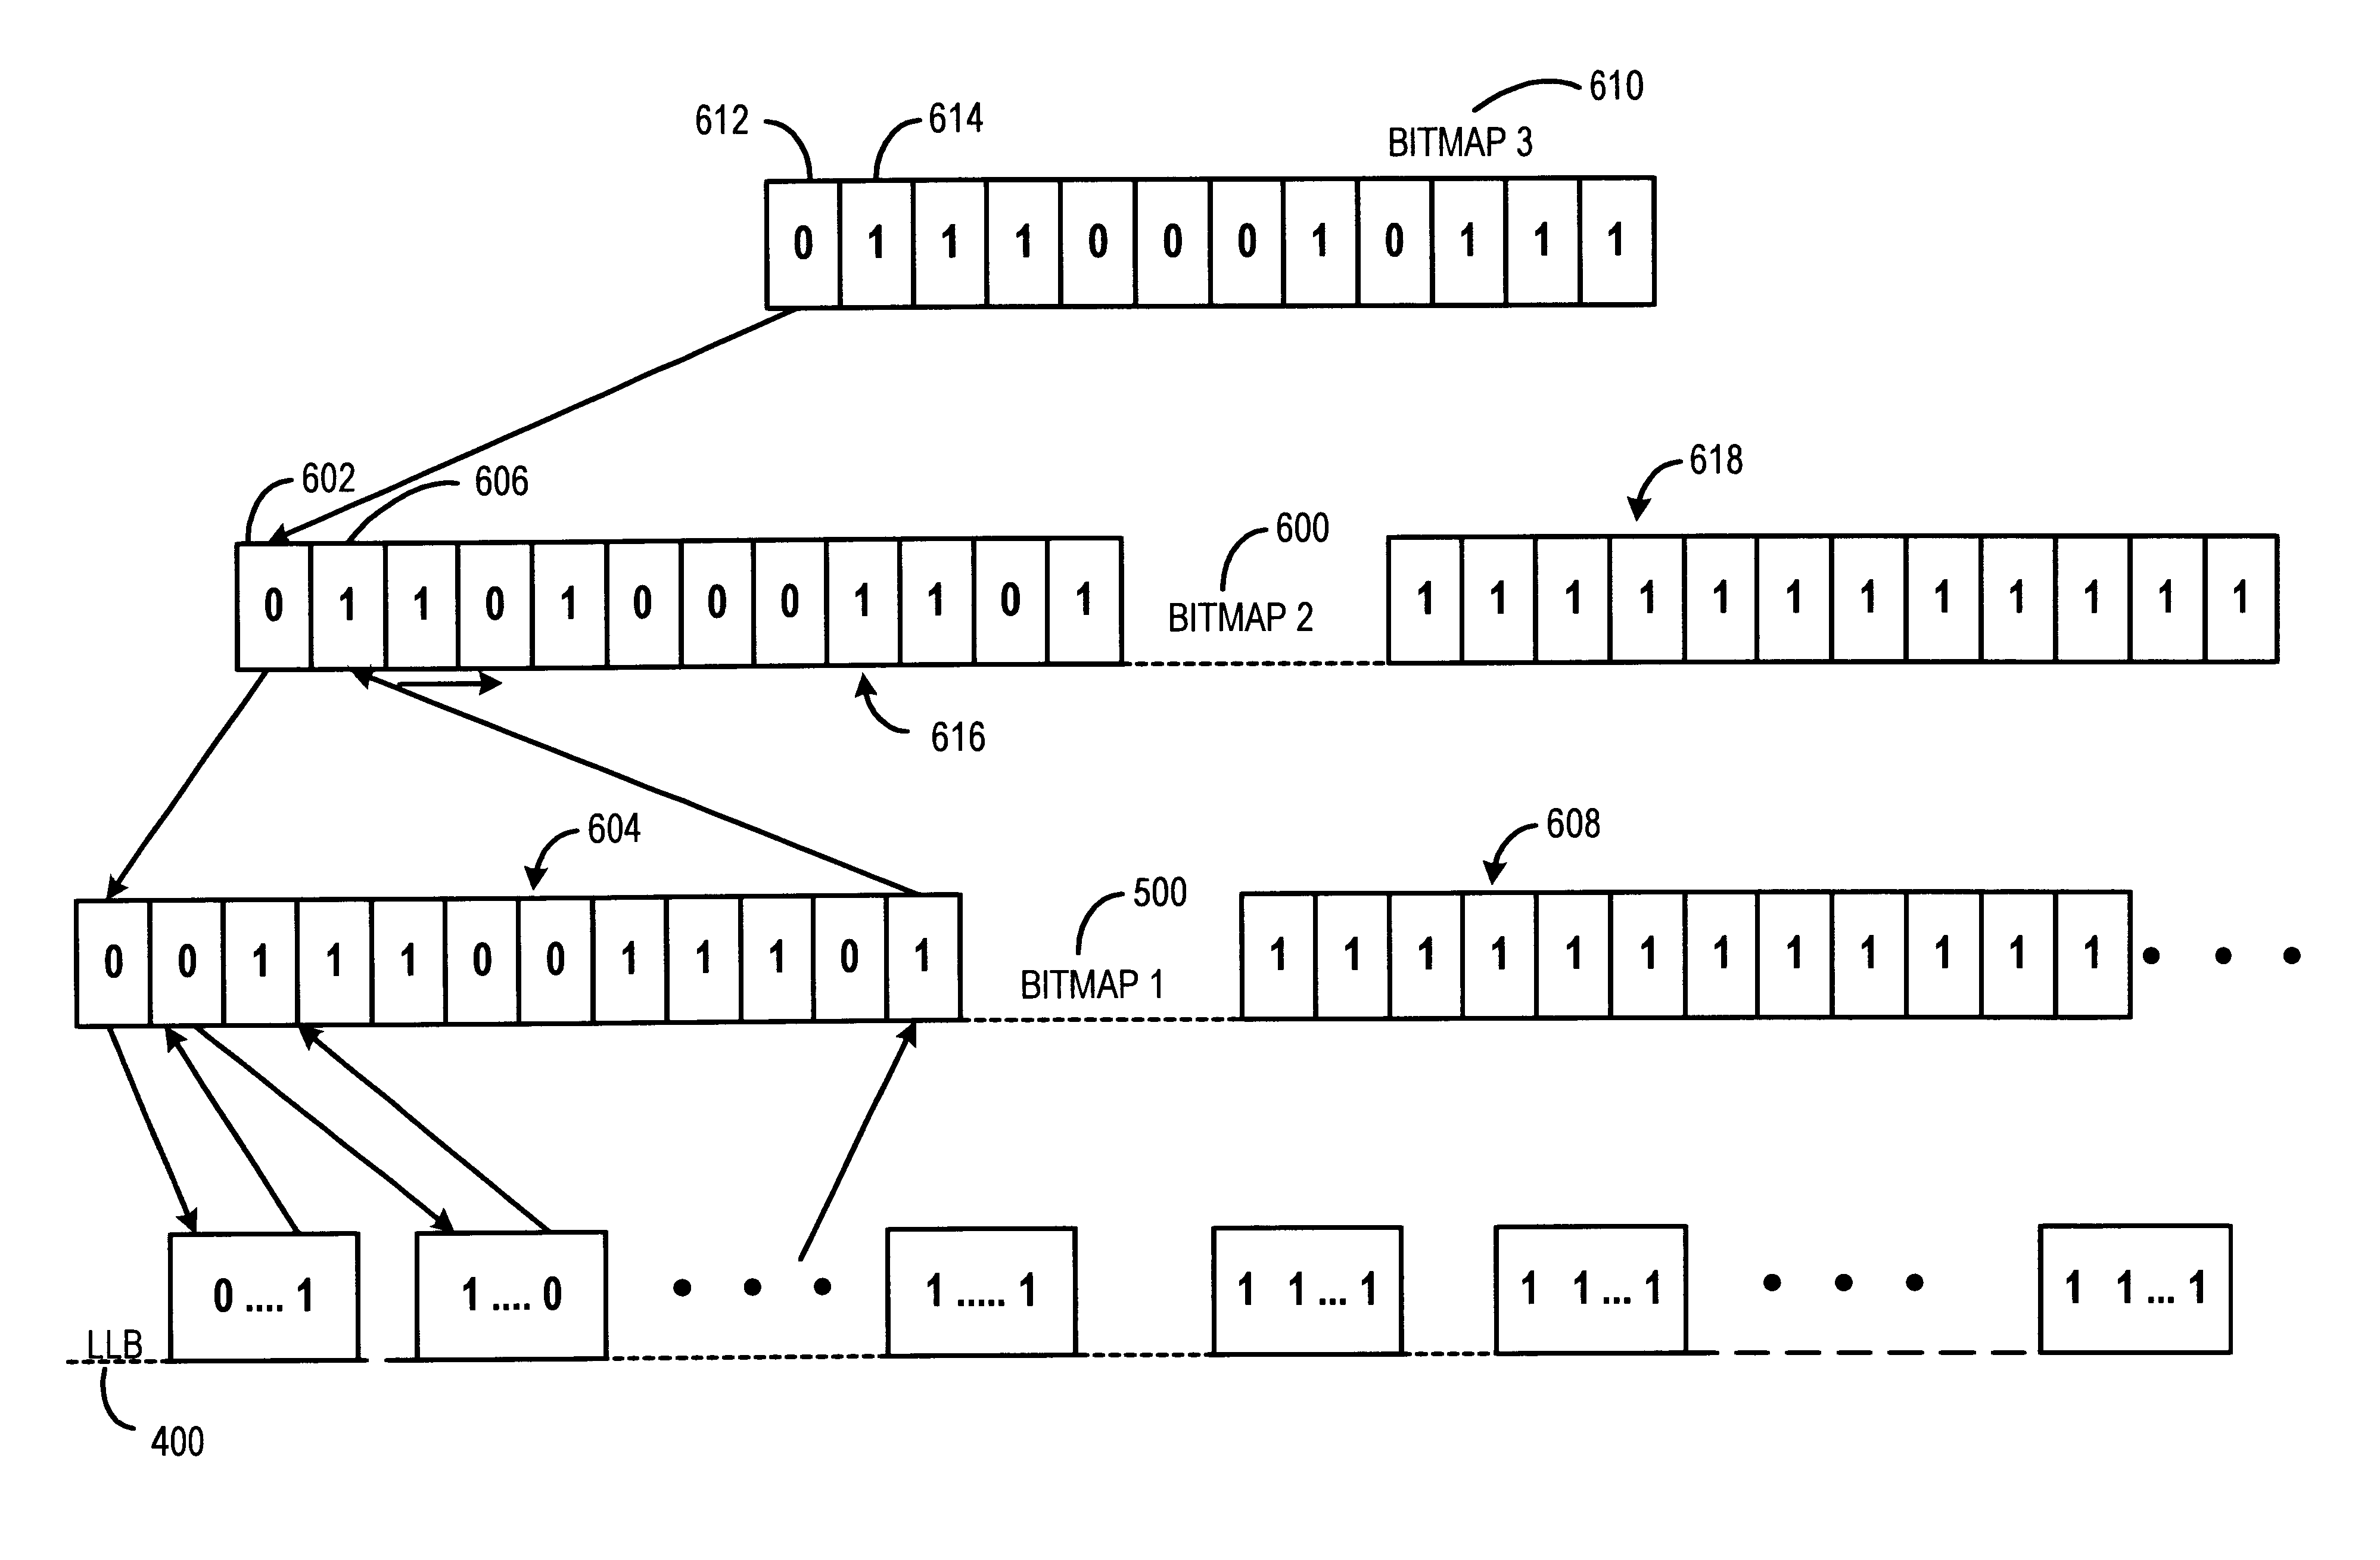 System and method for utilizing a hierarchical bitmap structure for locating a set of contiguous ordered search items having a common attribute